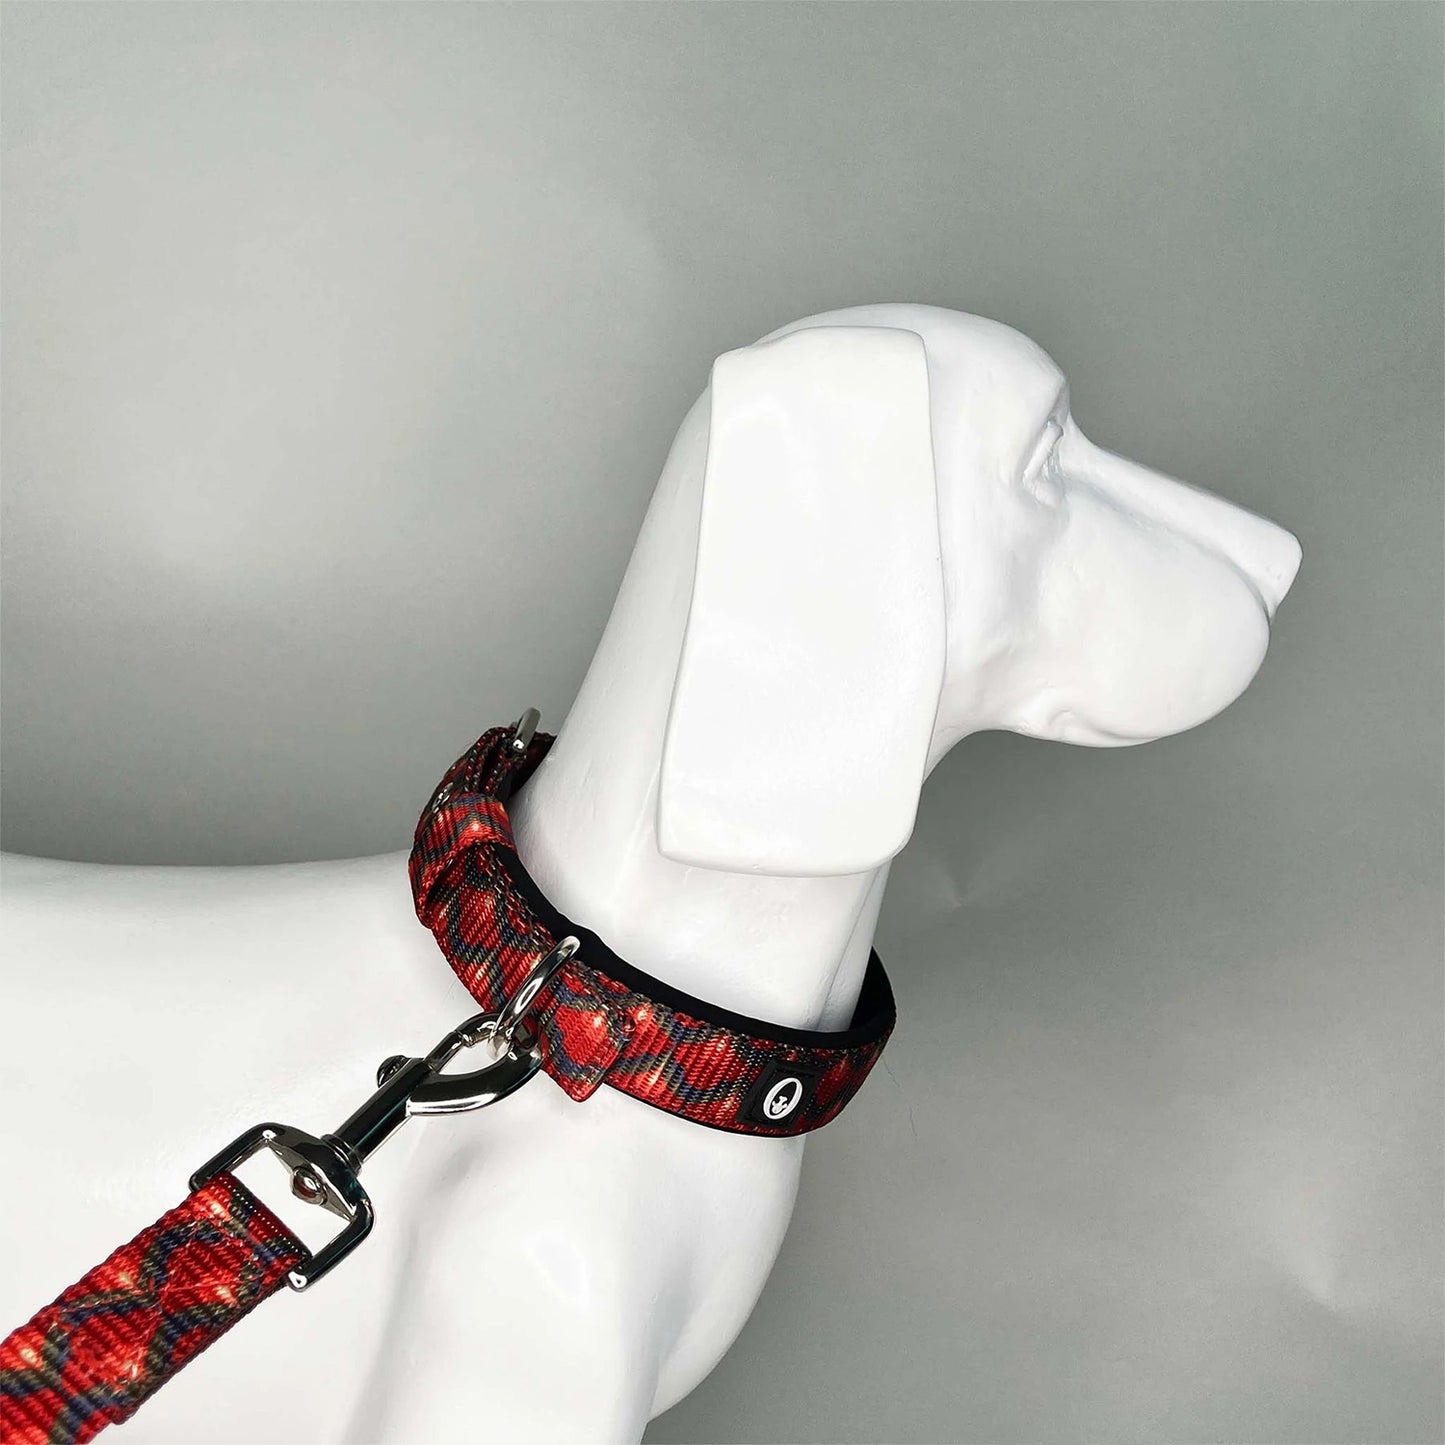 Forfurs - Enlightened Pin Buckle Collar For Dogs & Cats